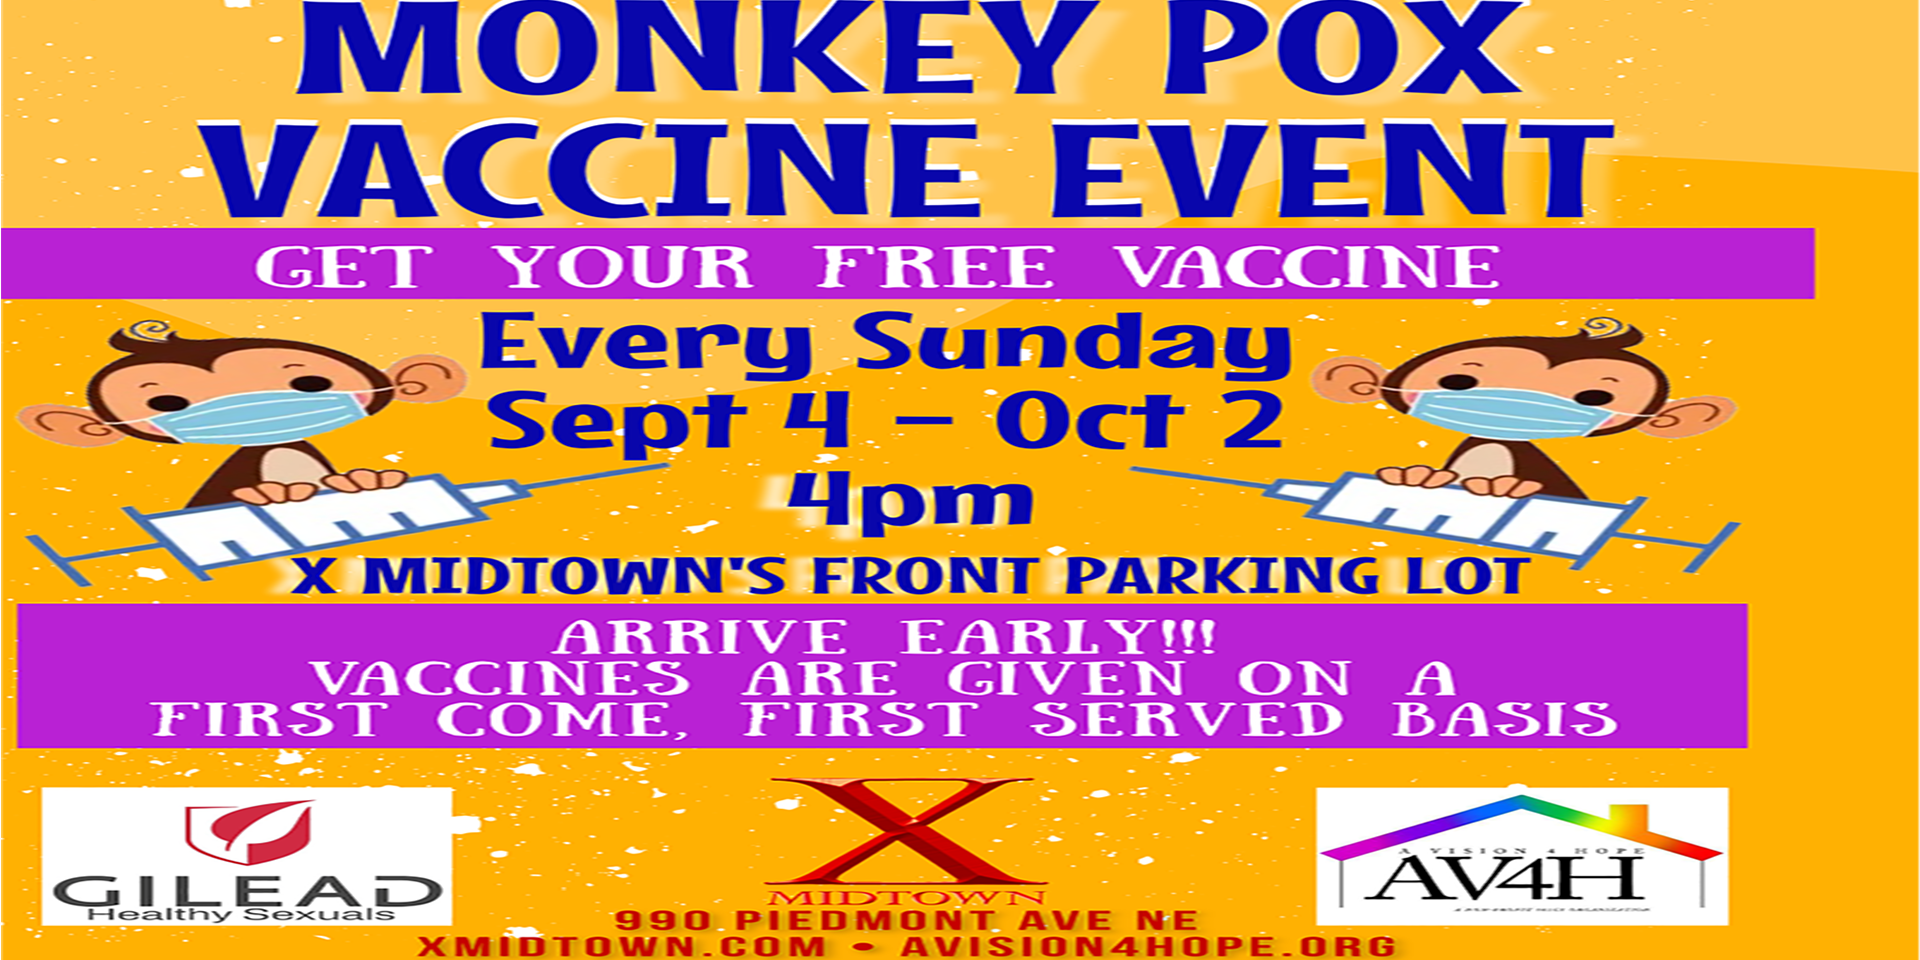 FREE Monkey Pox Vaccine Event At X Midtown promotional image